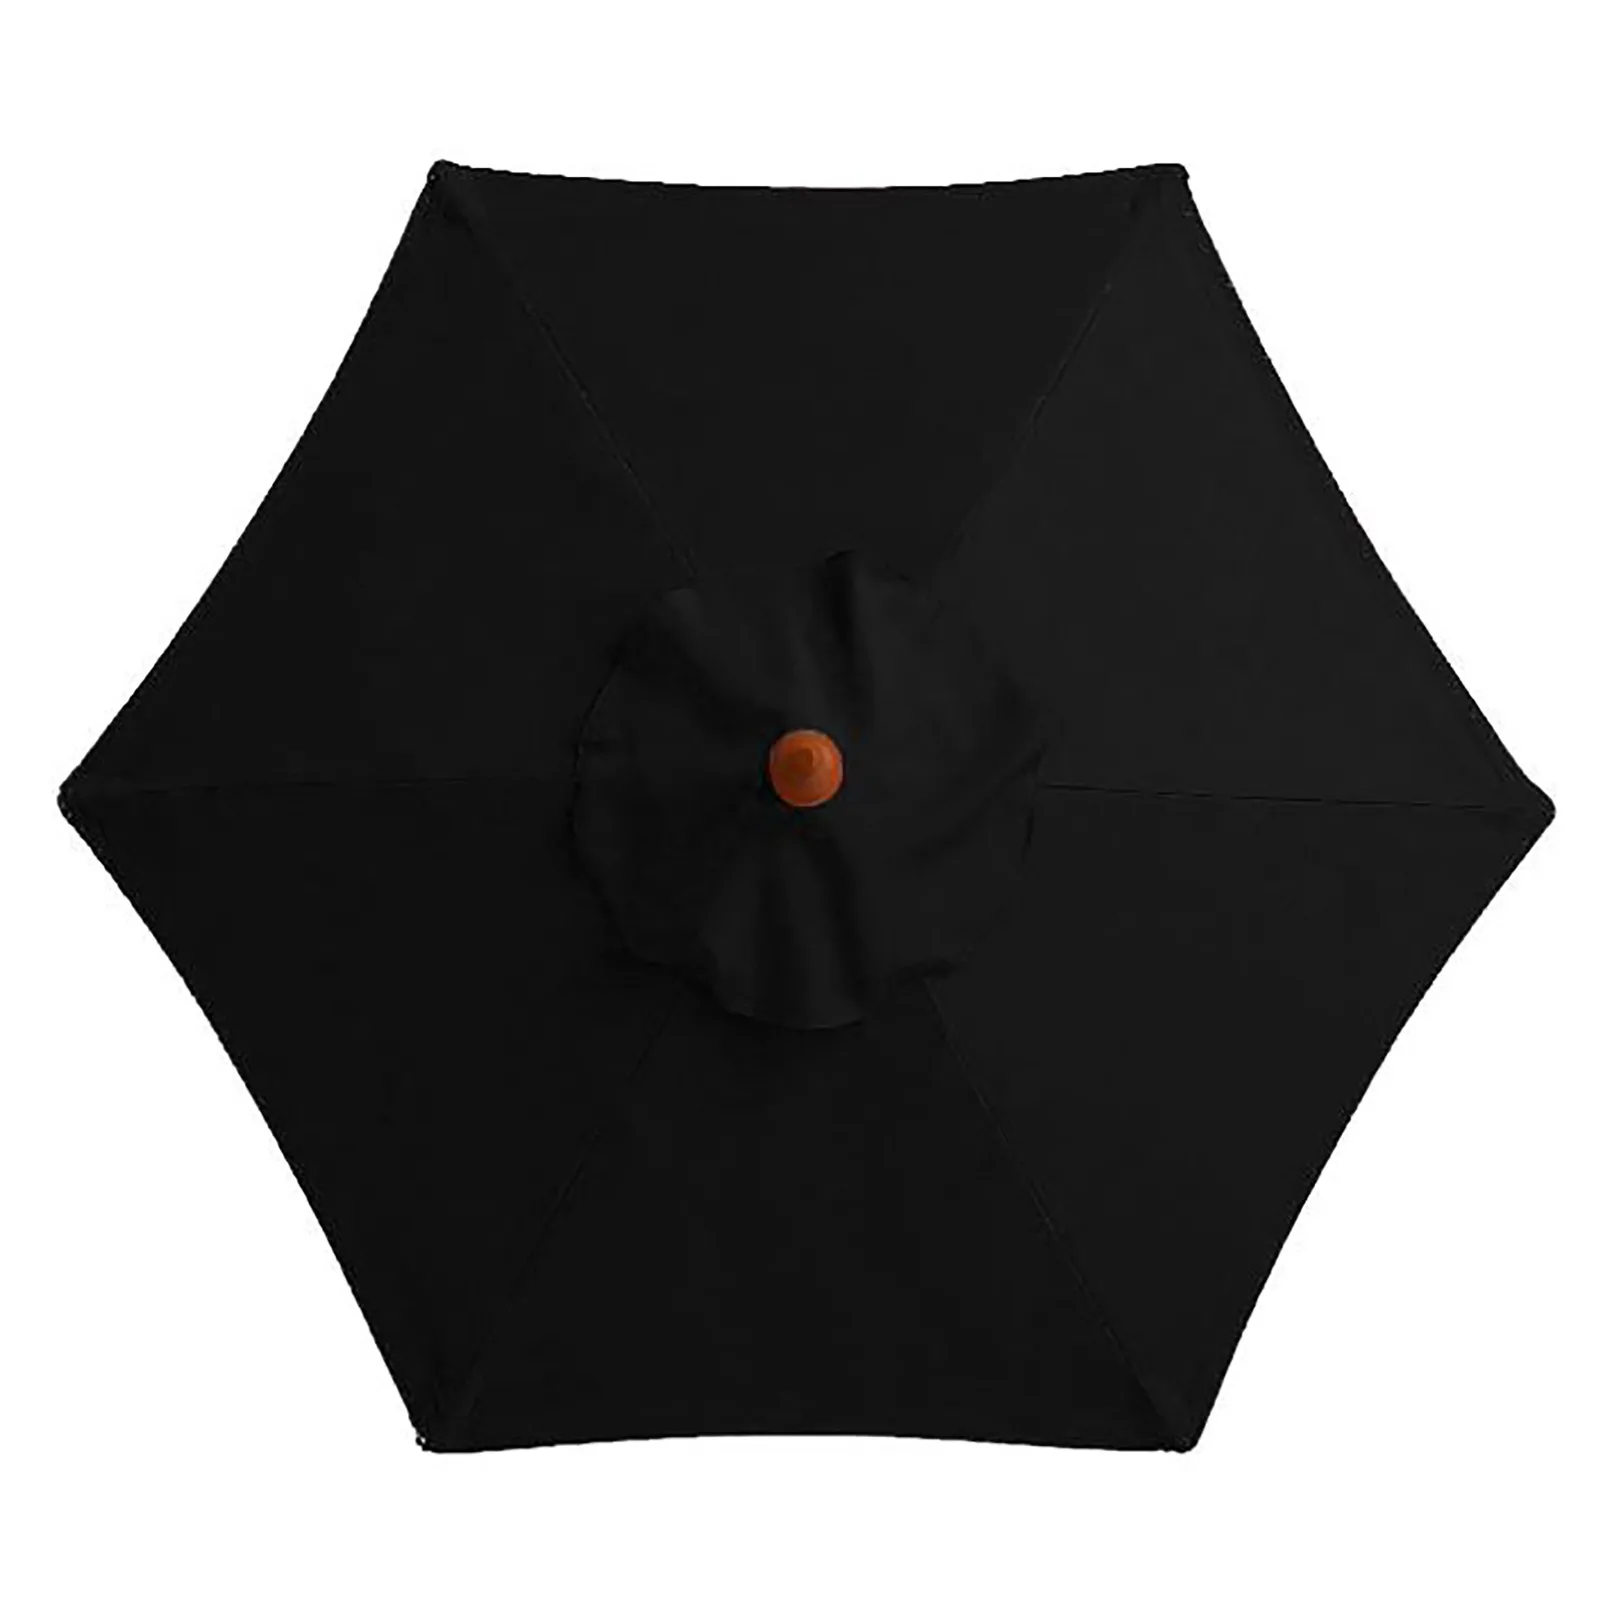 

Awnings Shades Replacement Canopy Market Umbrella Black 2M Hexagon Oxford Cloth Waterproof Durable Patio Umbrellas